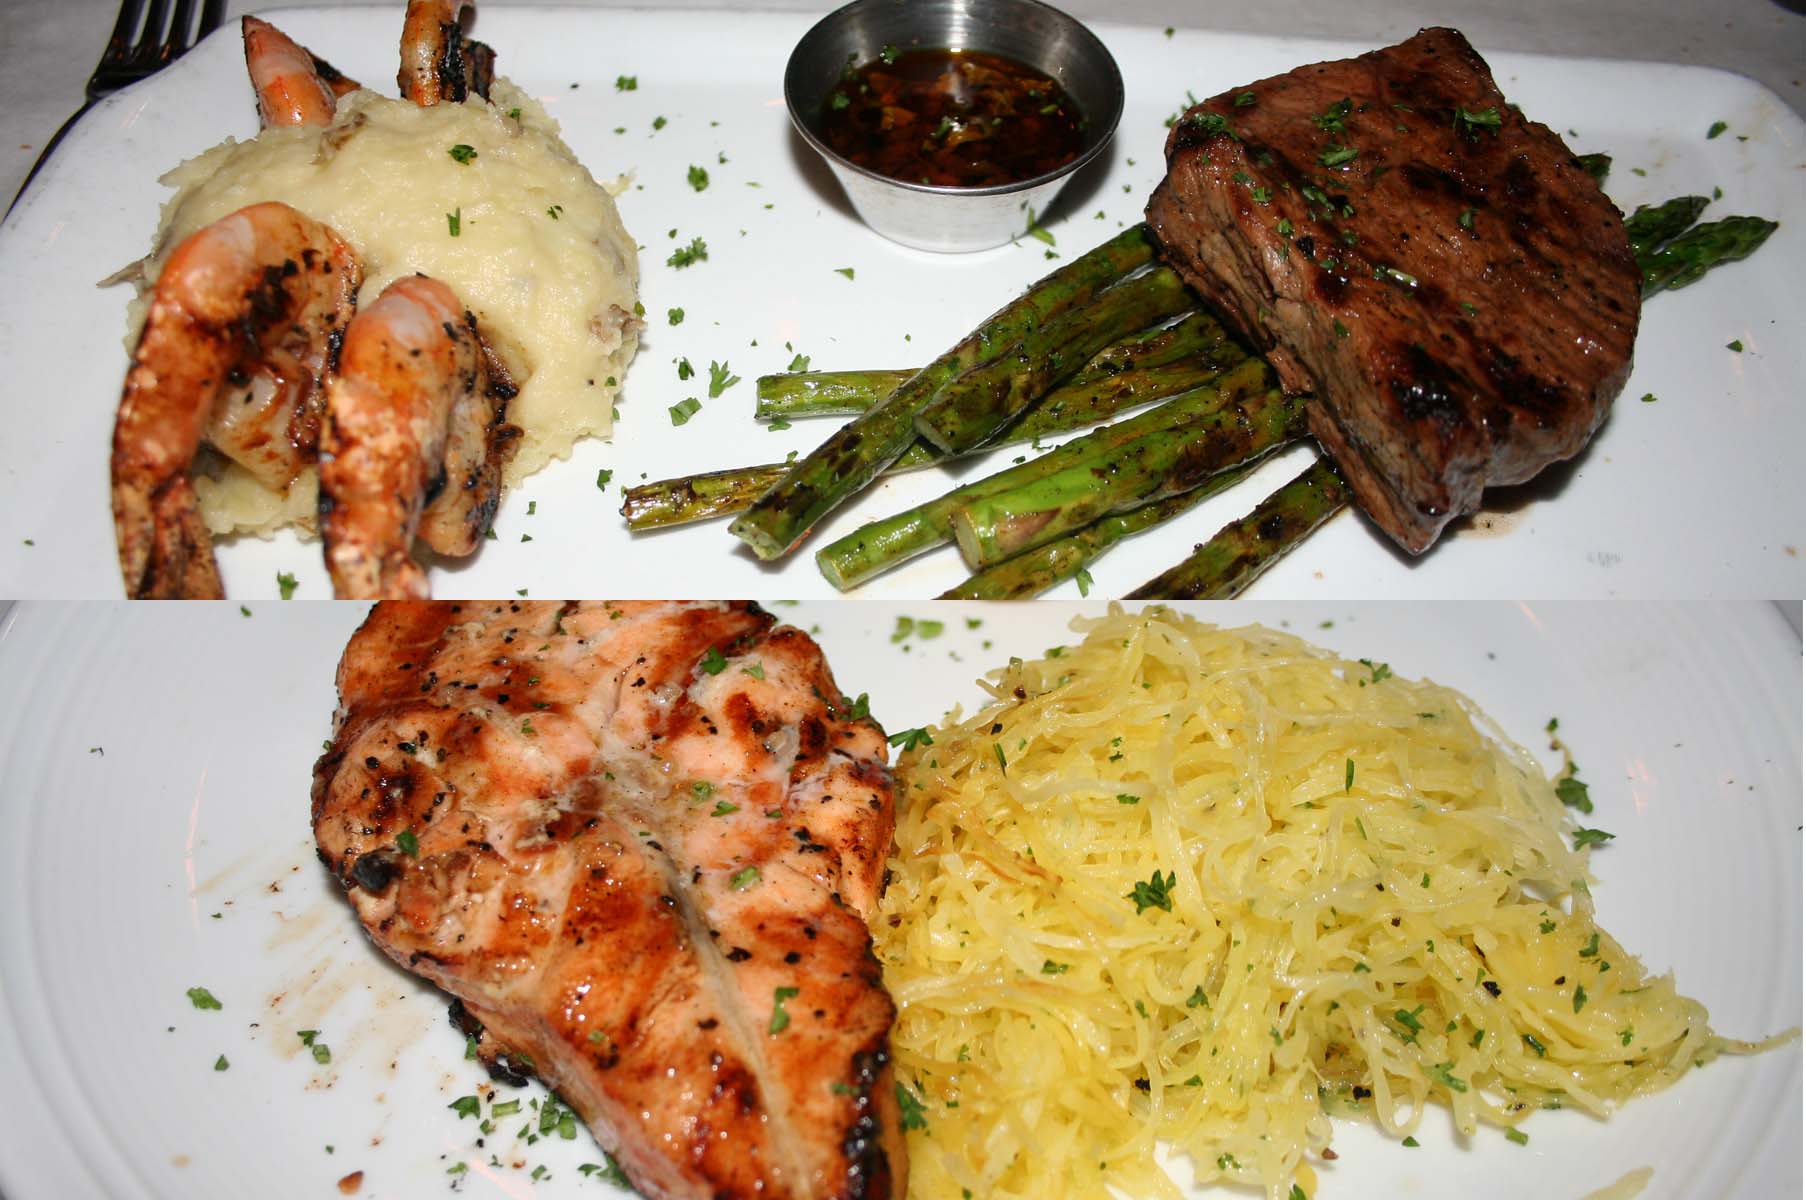 Grillfish's surf n turf (top) with steak and shrimp and salmon with spaghetti squash feature sustainable seafood. (Photo: Mark Heckathorn/DC on Heels)